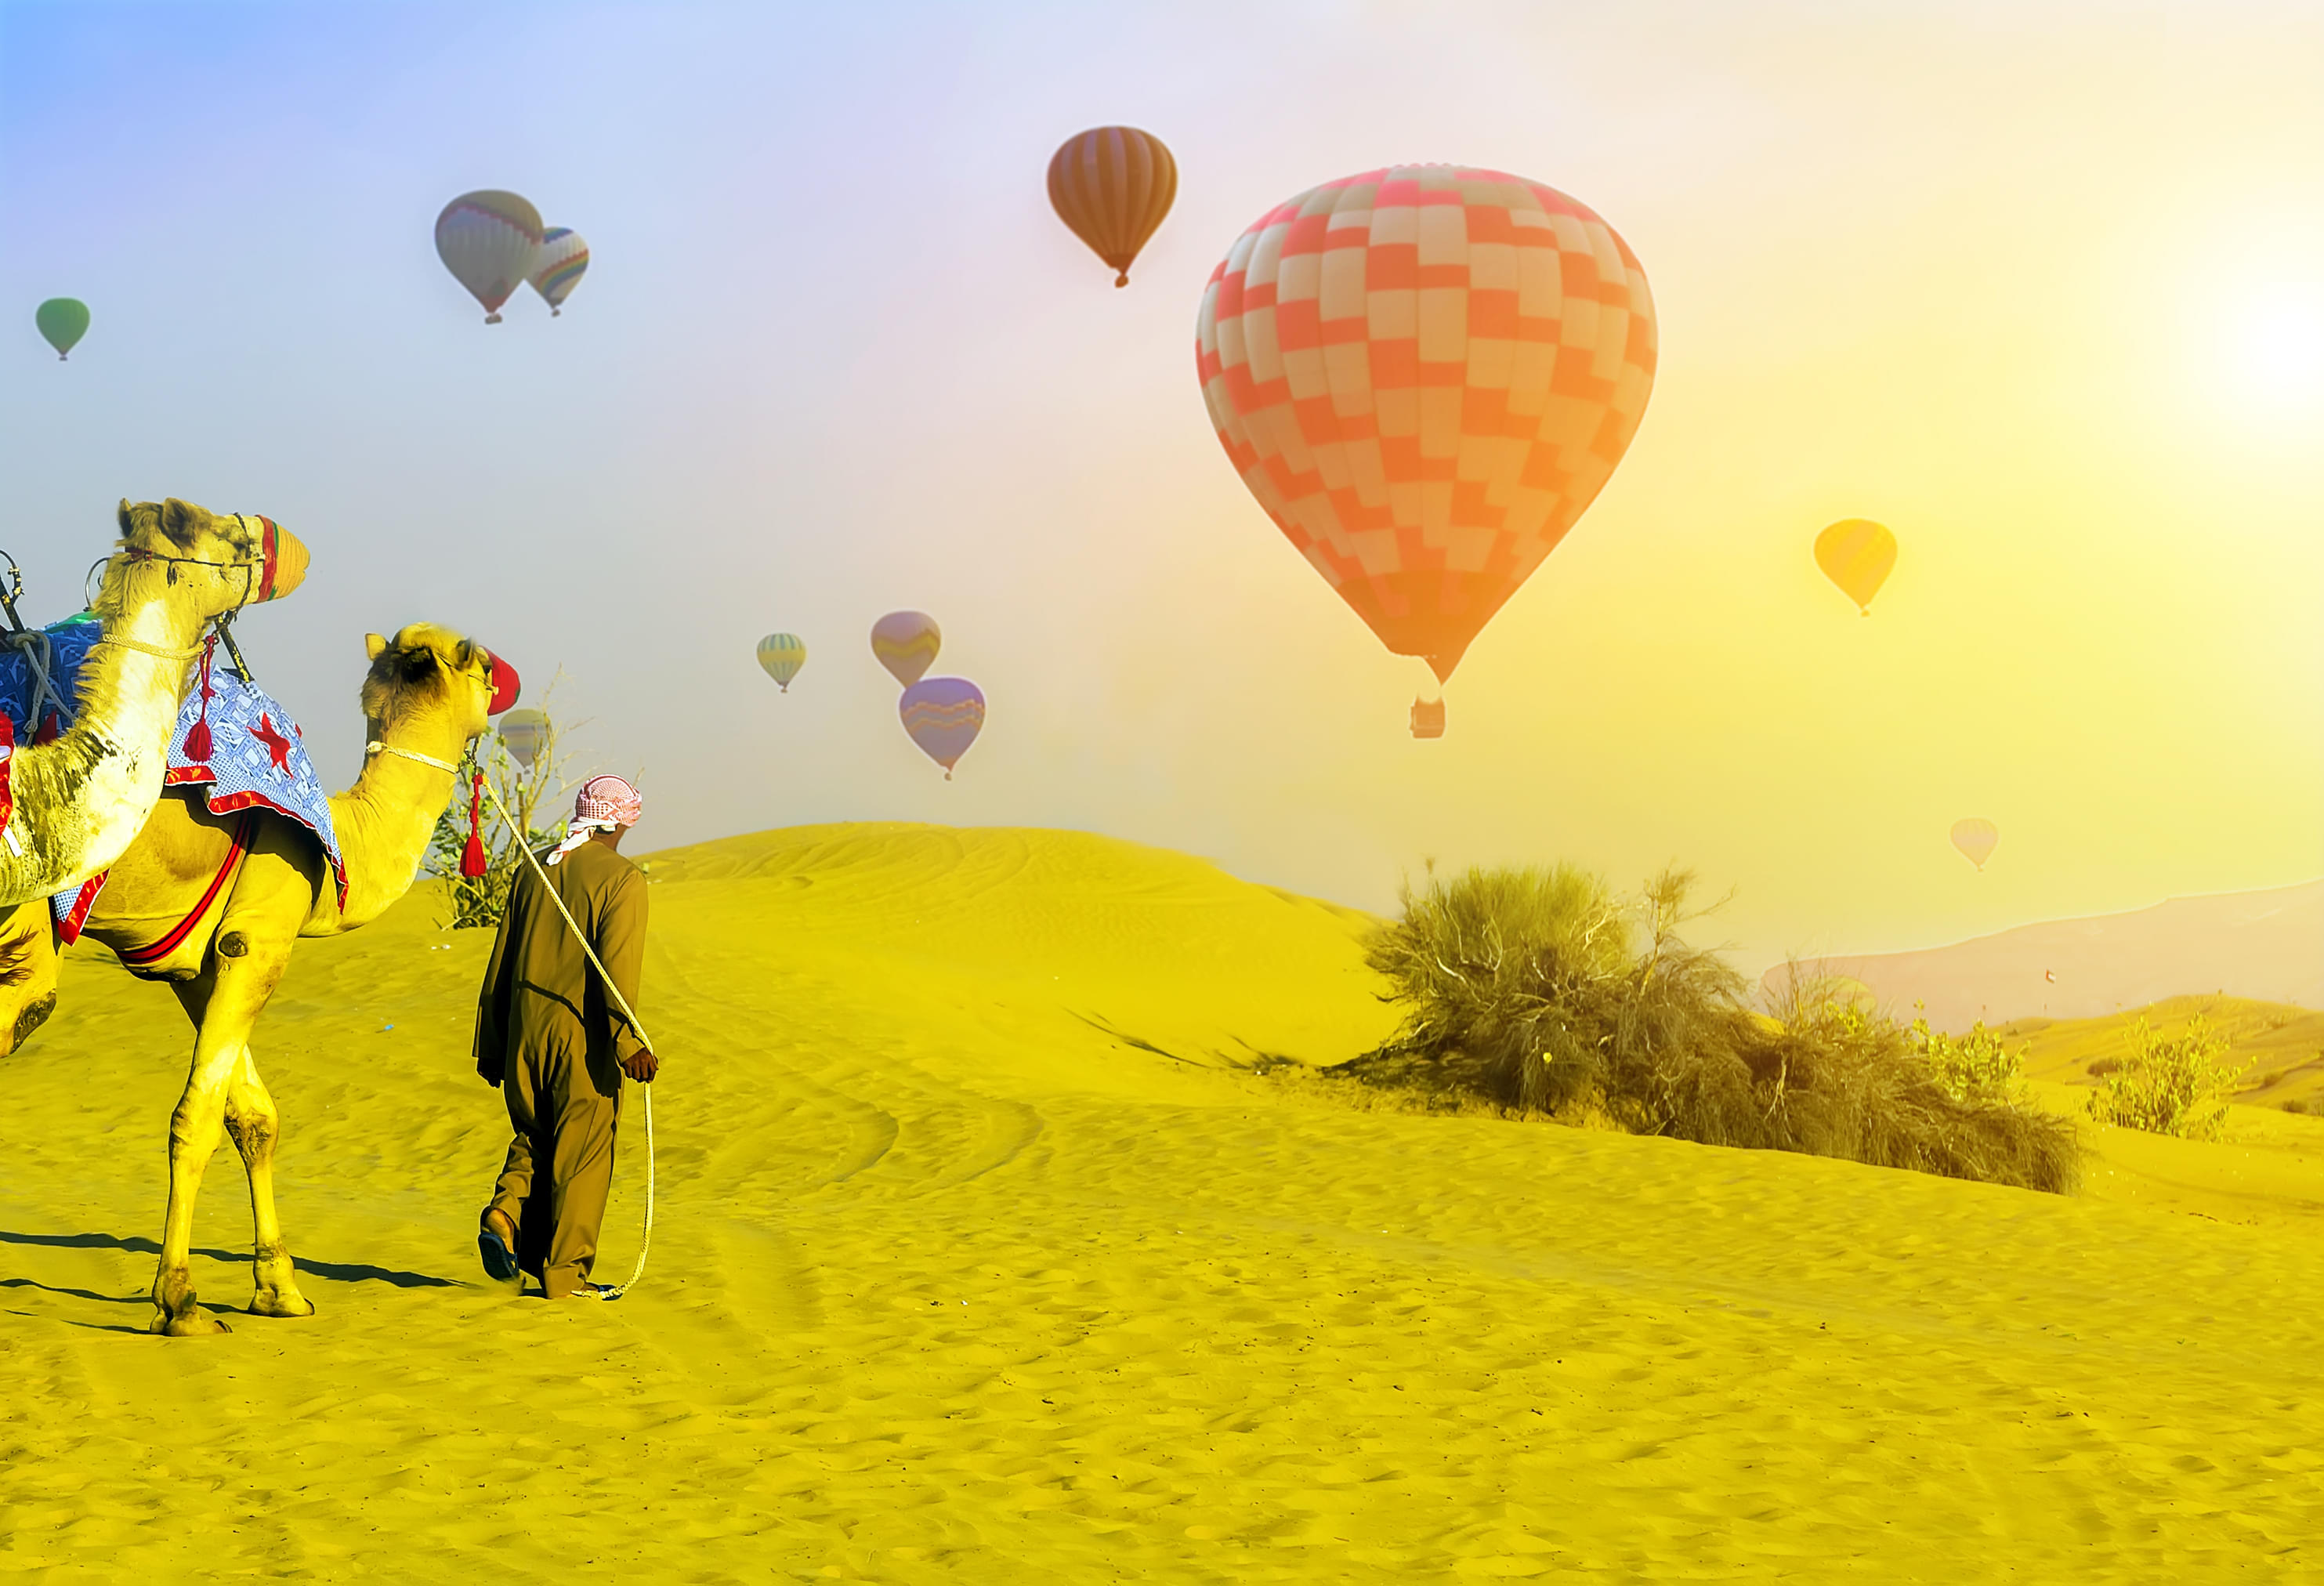 Balloon flies over the desert during Dubai balloon festival with a camel in the background